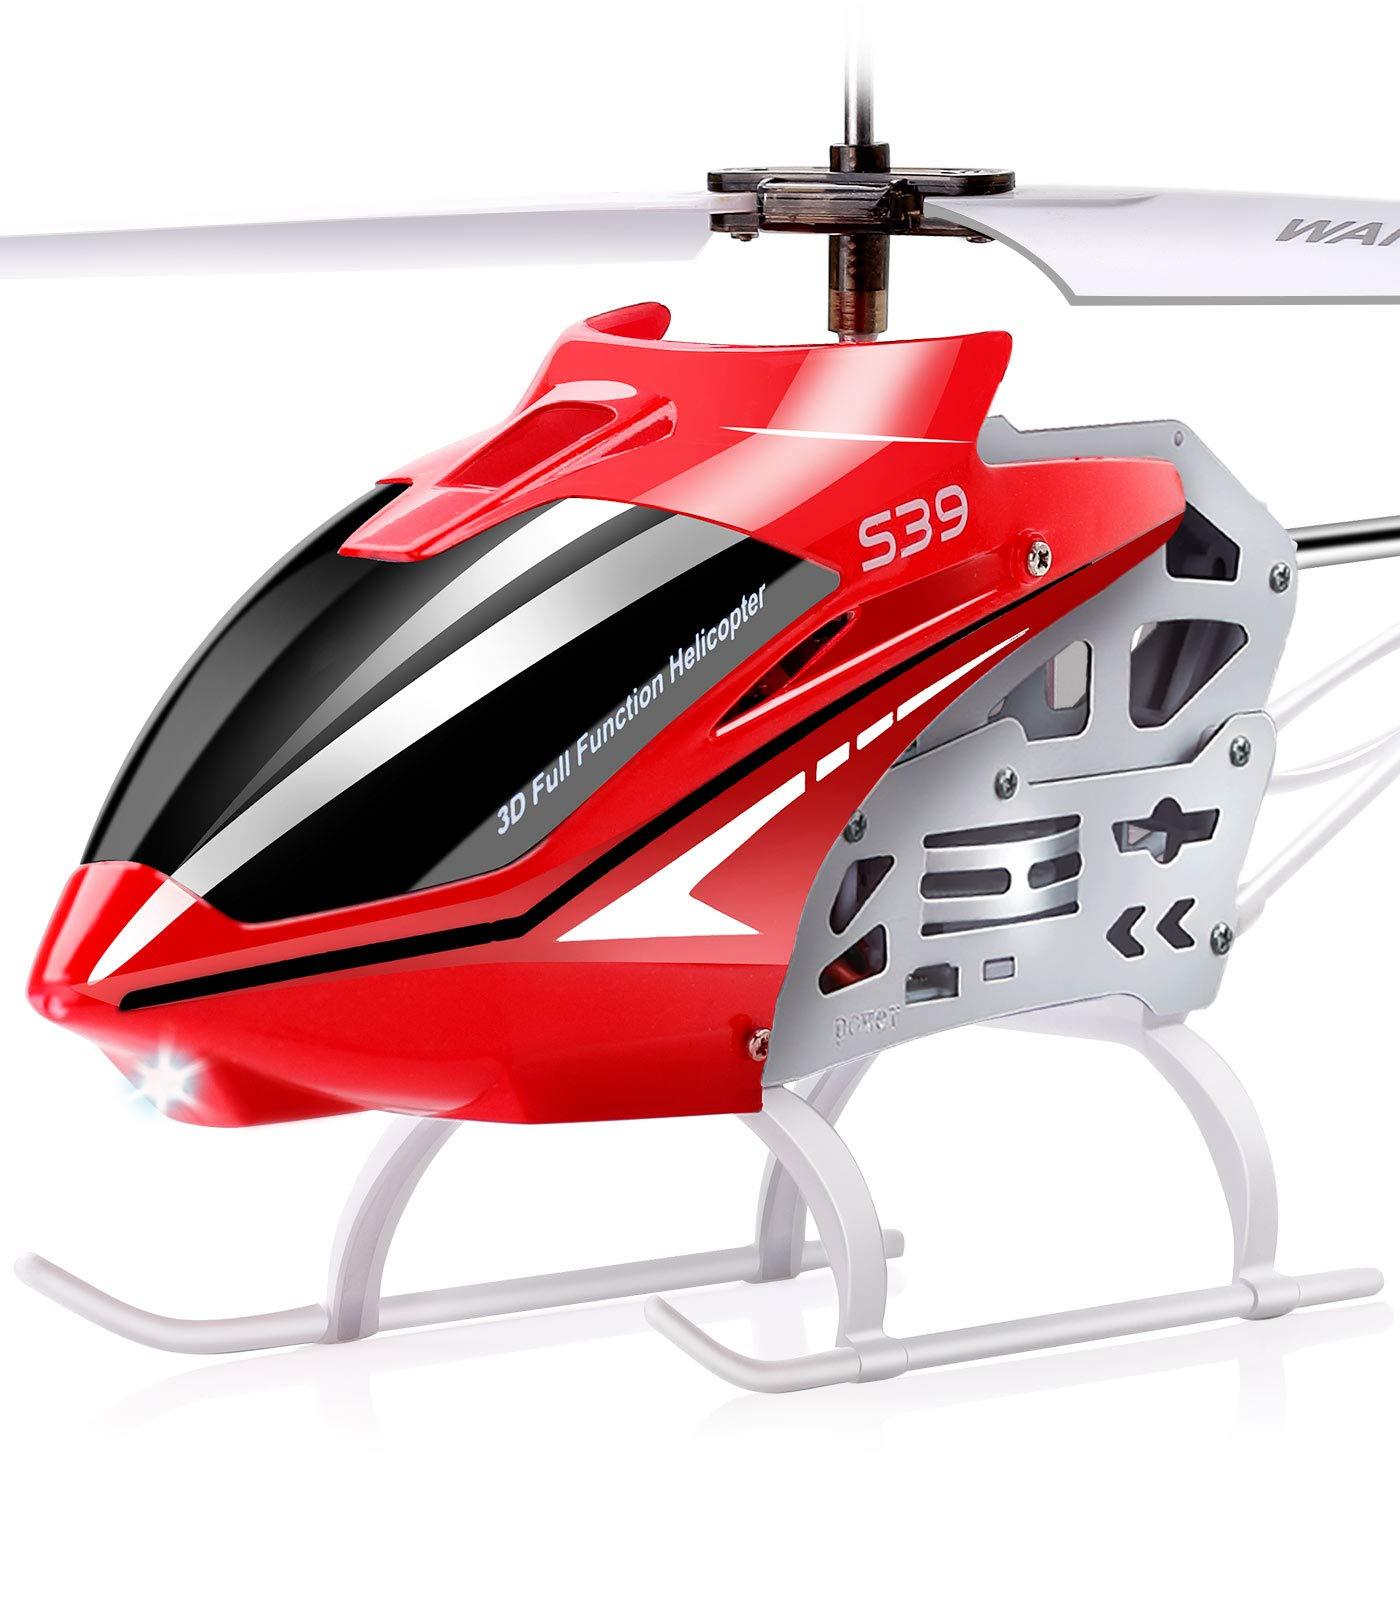 Syma S37 Rc Helicopter: Compare the Syma S37 RC Helicopter to Other Popular RC Helicopters